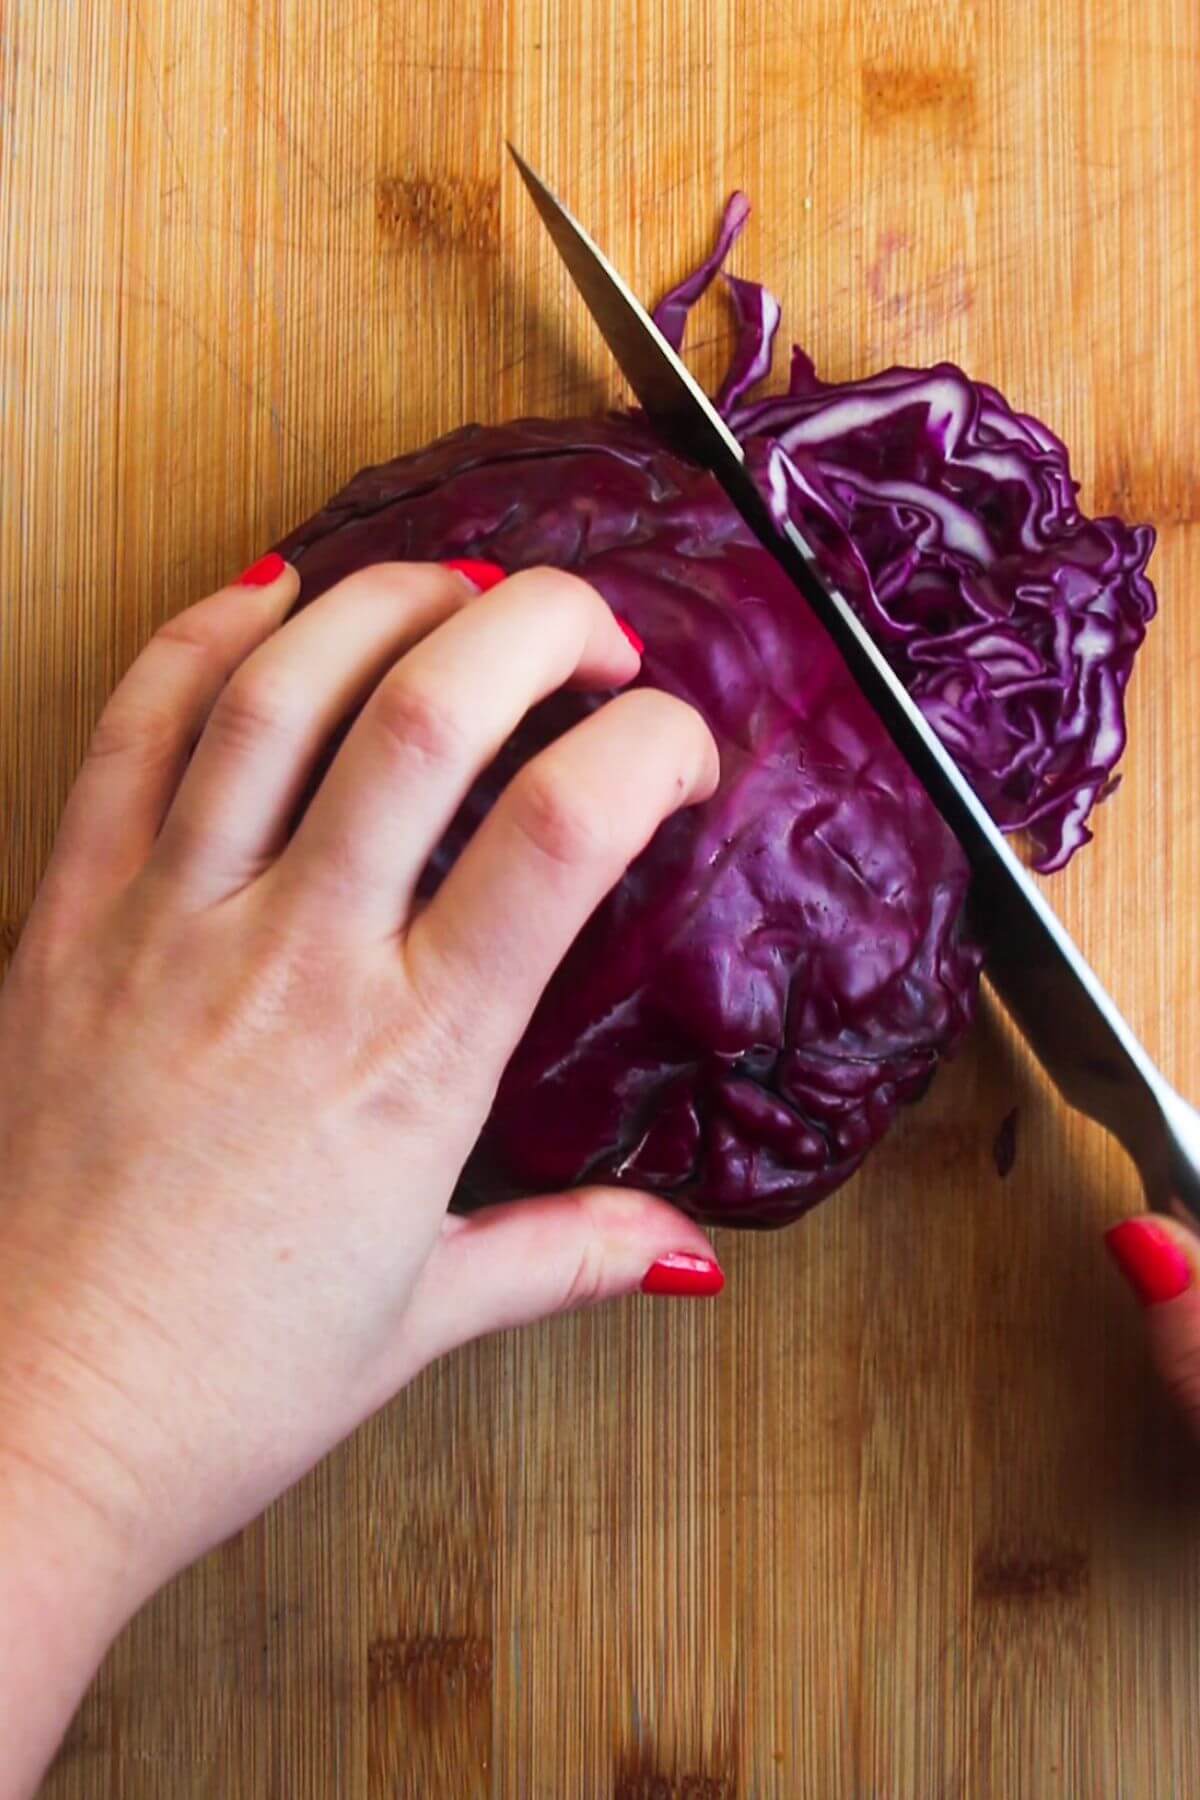 Hand holding red cabbage and slicing it thinly with a large knife.